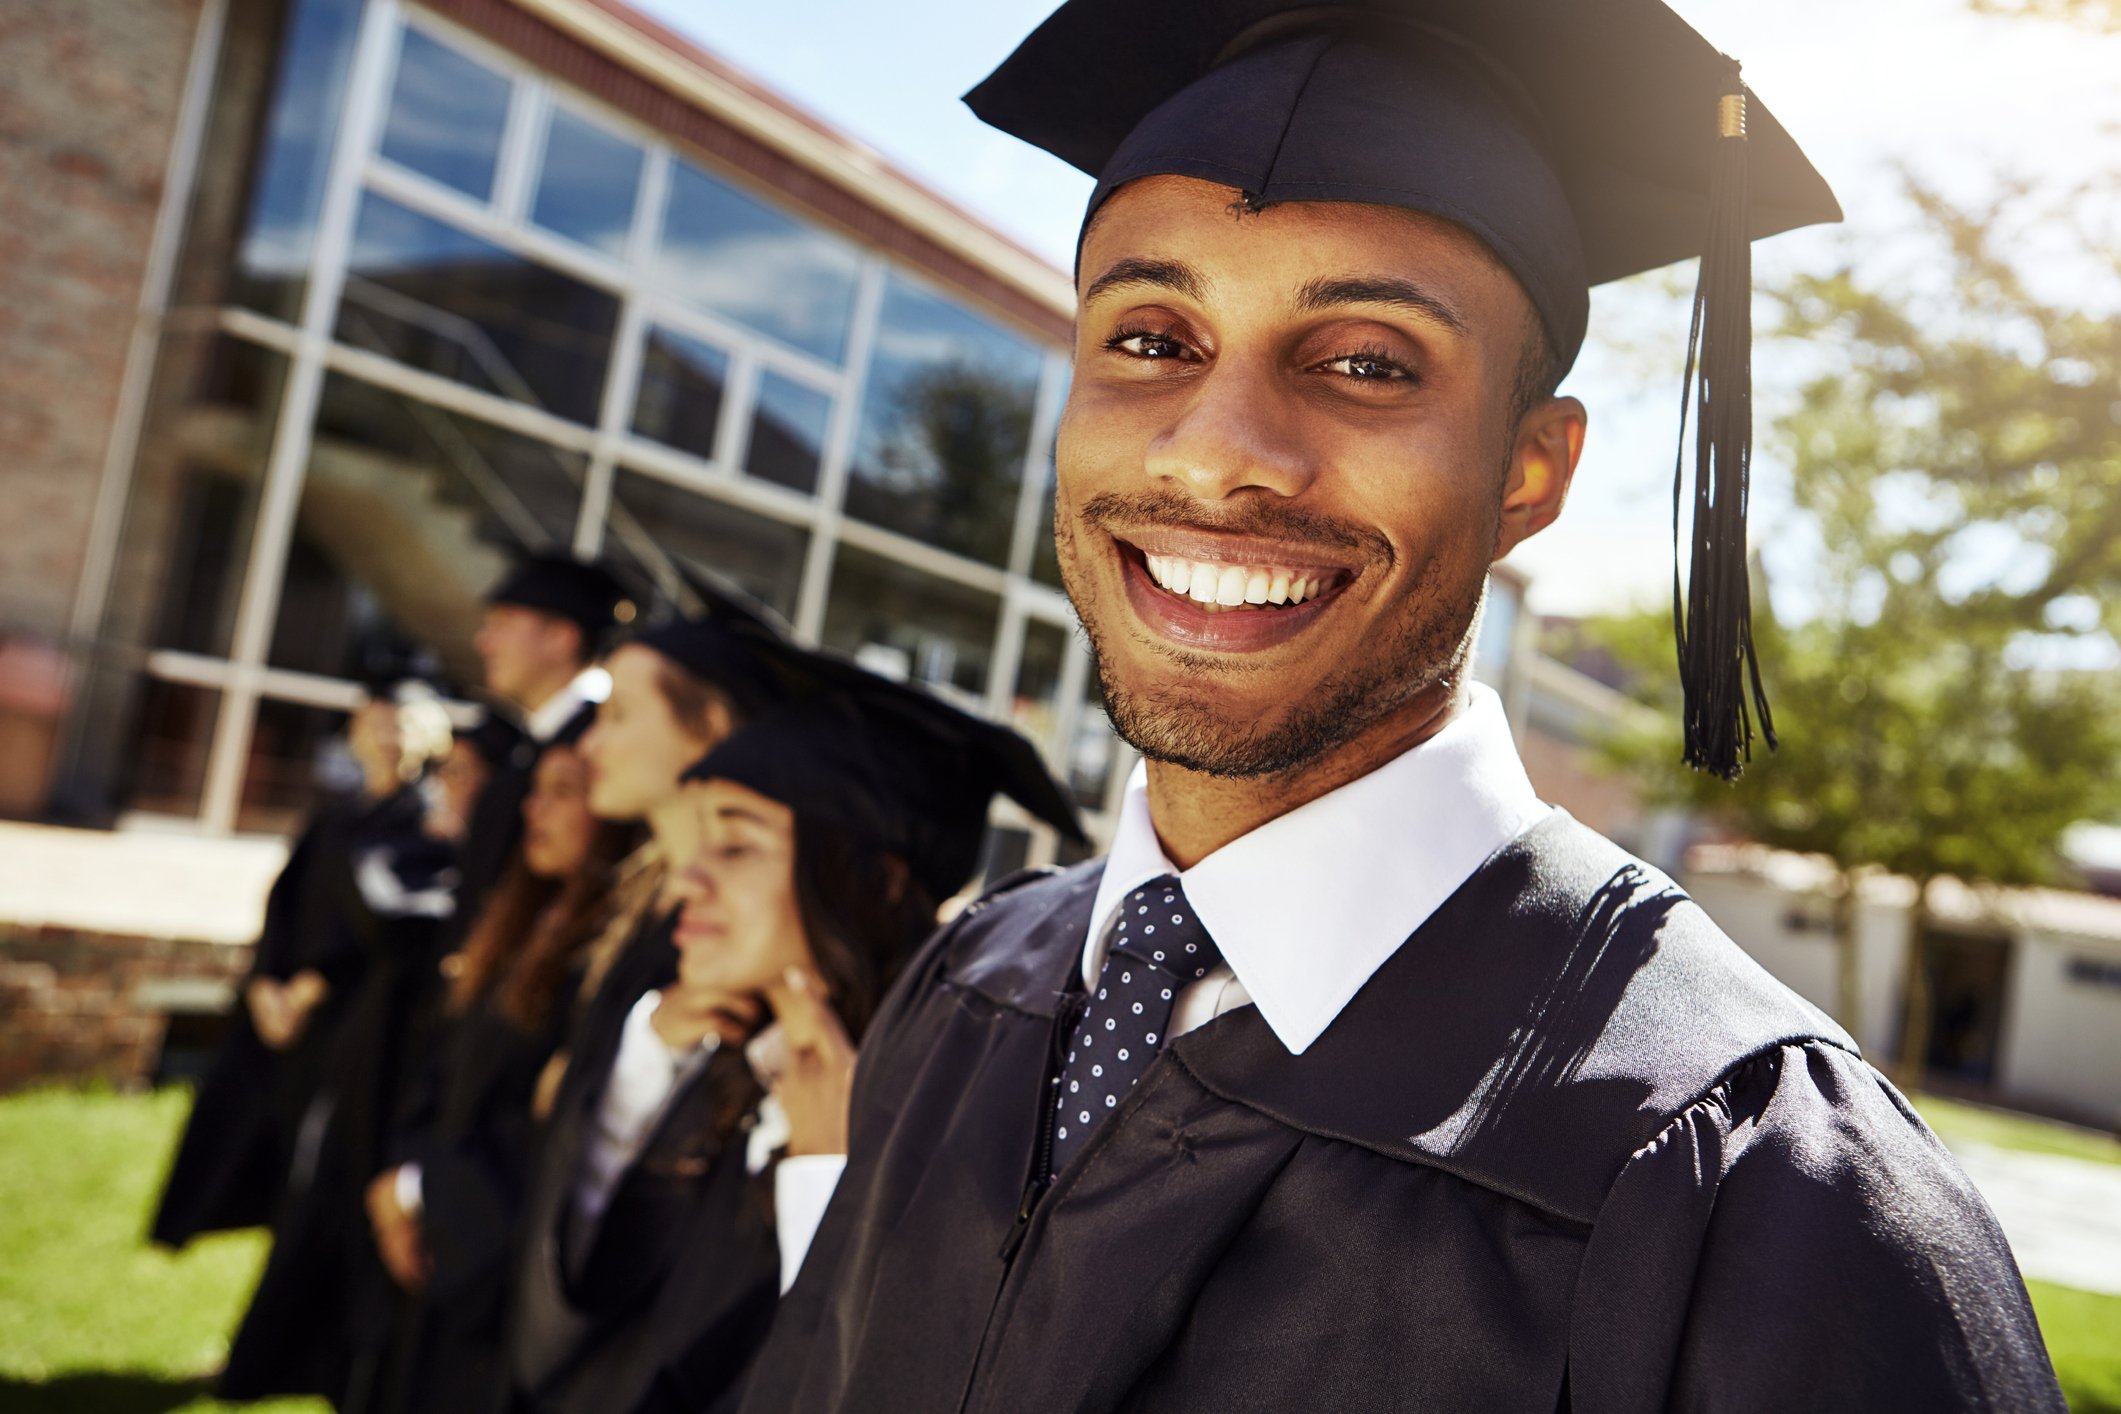 group of students at graduation with one young man smiling directly at the camera